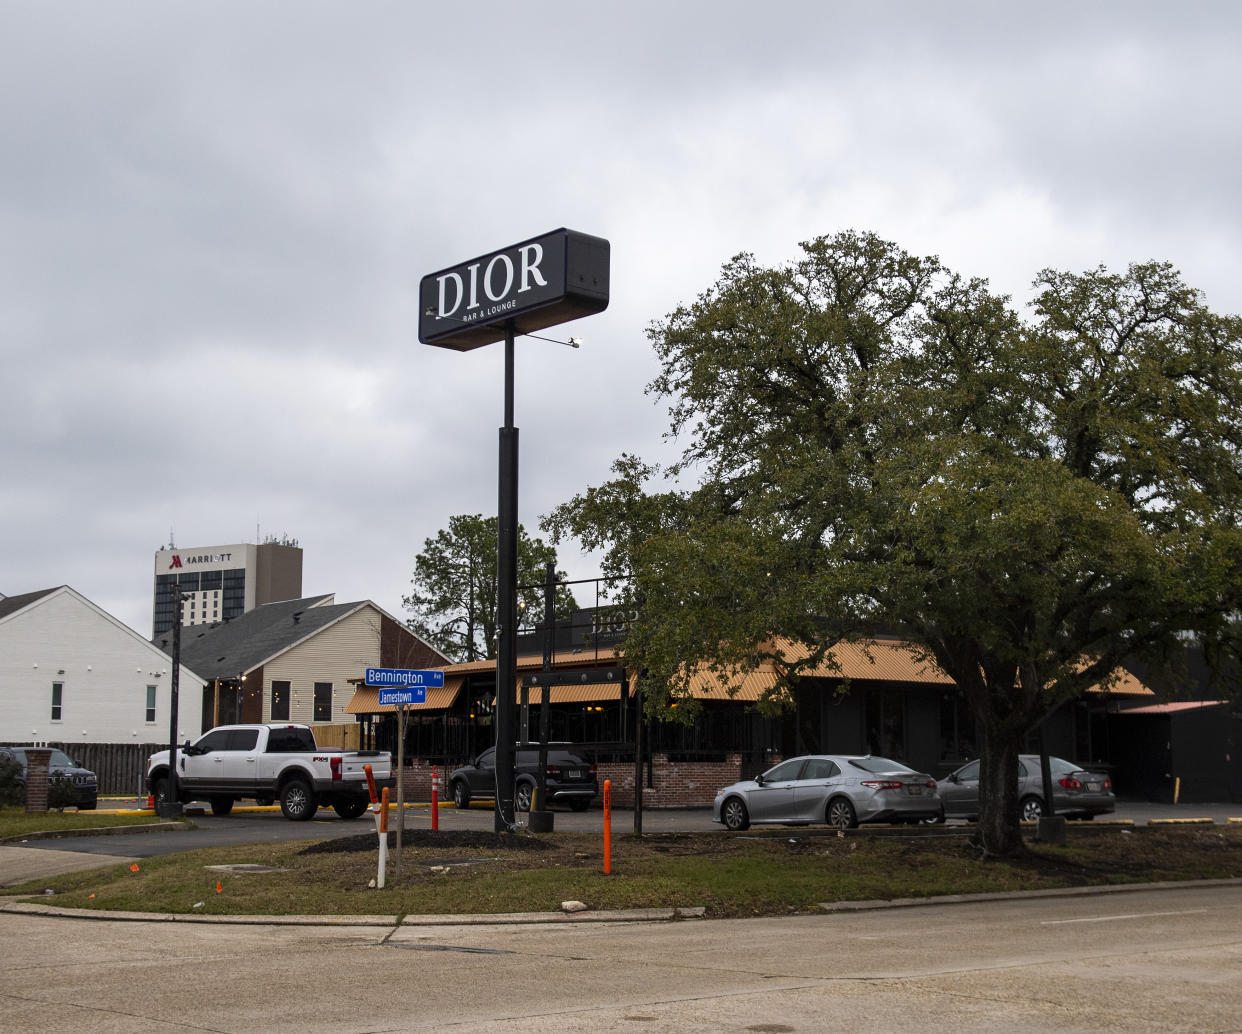 FILE - Dior Bar & Lounge on Bennington Avenue was the scene of an overnight shooting that left multiple people injured, Jan. 22, 2023, in Baton Rouge, La. On Friday, Feb. 10, police in Louisiana's capital city of Baton Rouge arrested two people for a mass shooting that left 12 others wounded at a nightclub in January. (Michael Johnson/The Advocate via AP)